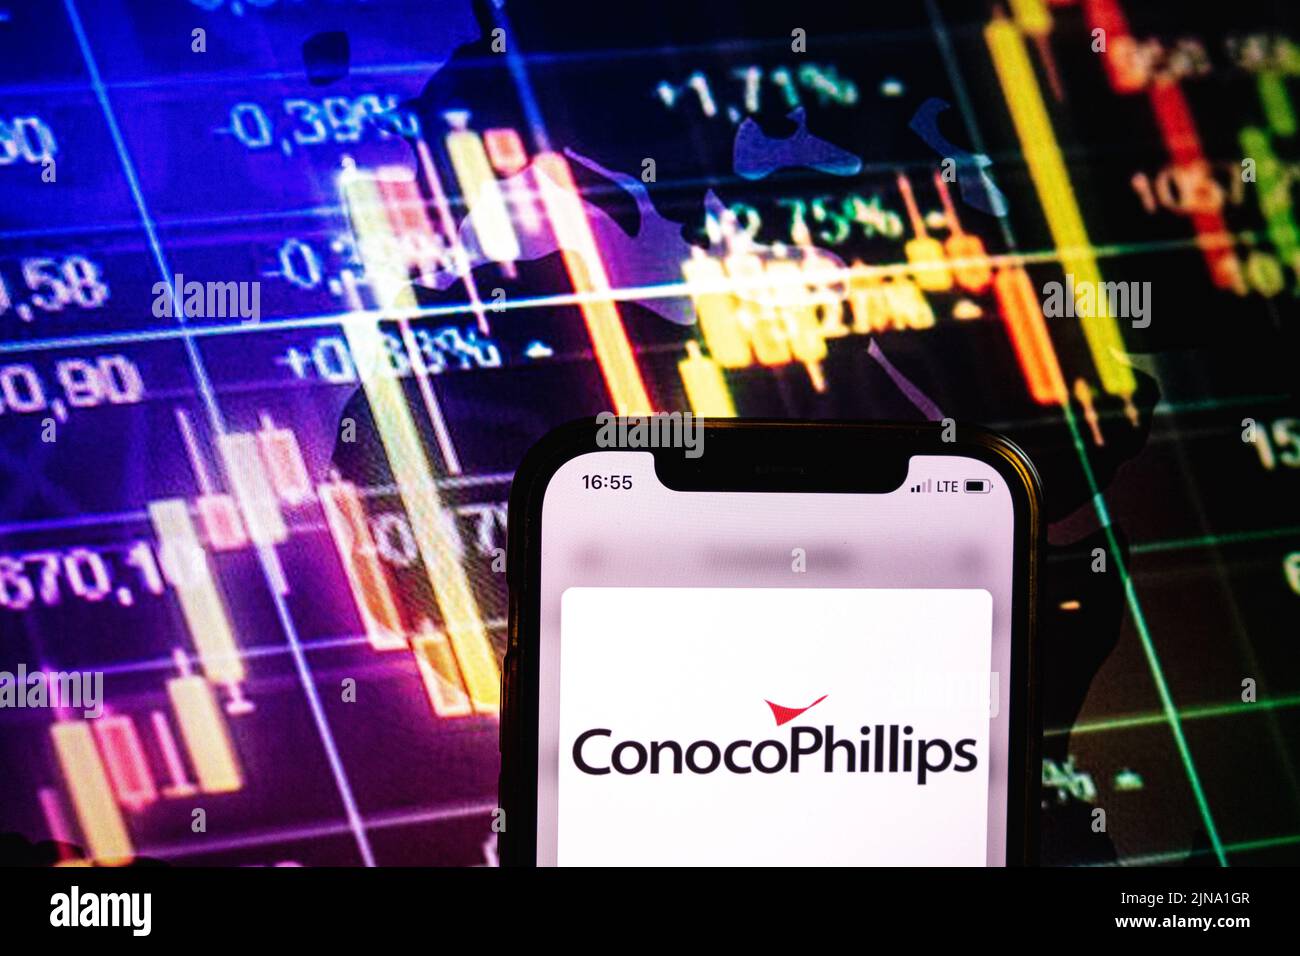 KONSKIE, POLAND - August 09, 2022: Smartphone displaying logo of ConocoPhillips company on stock exchange diagram background Stock Photo